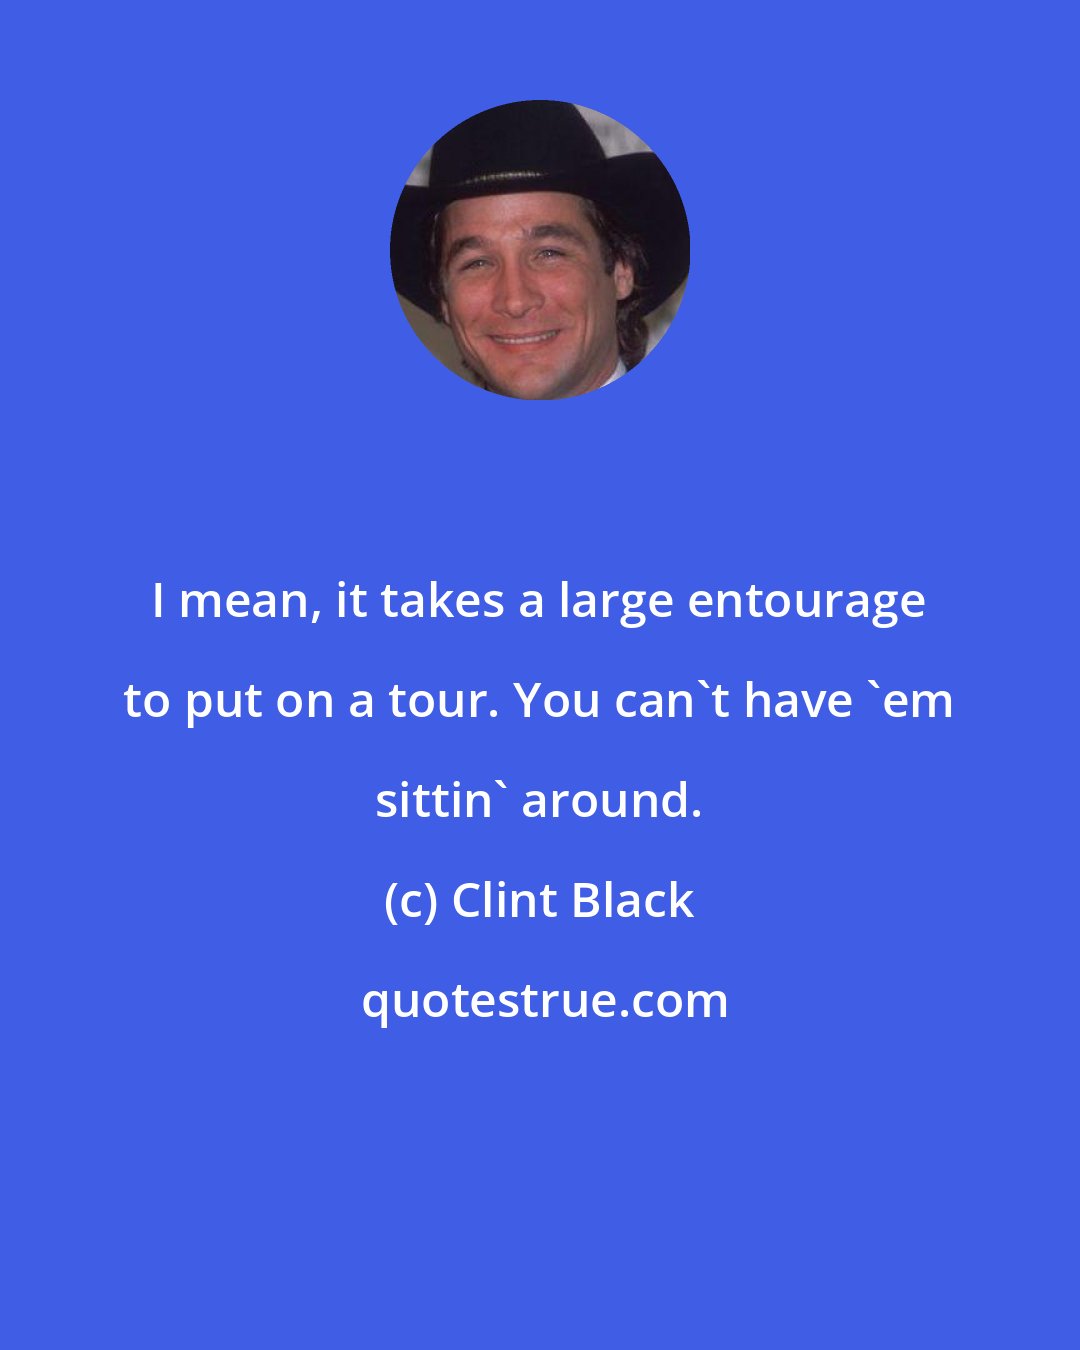 Clint Black: I mean, it takes a large entourage to put on a tour. You can't have 'em sittin' around.